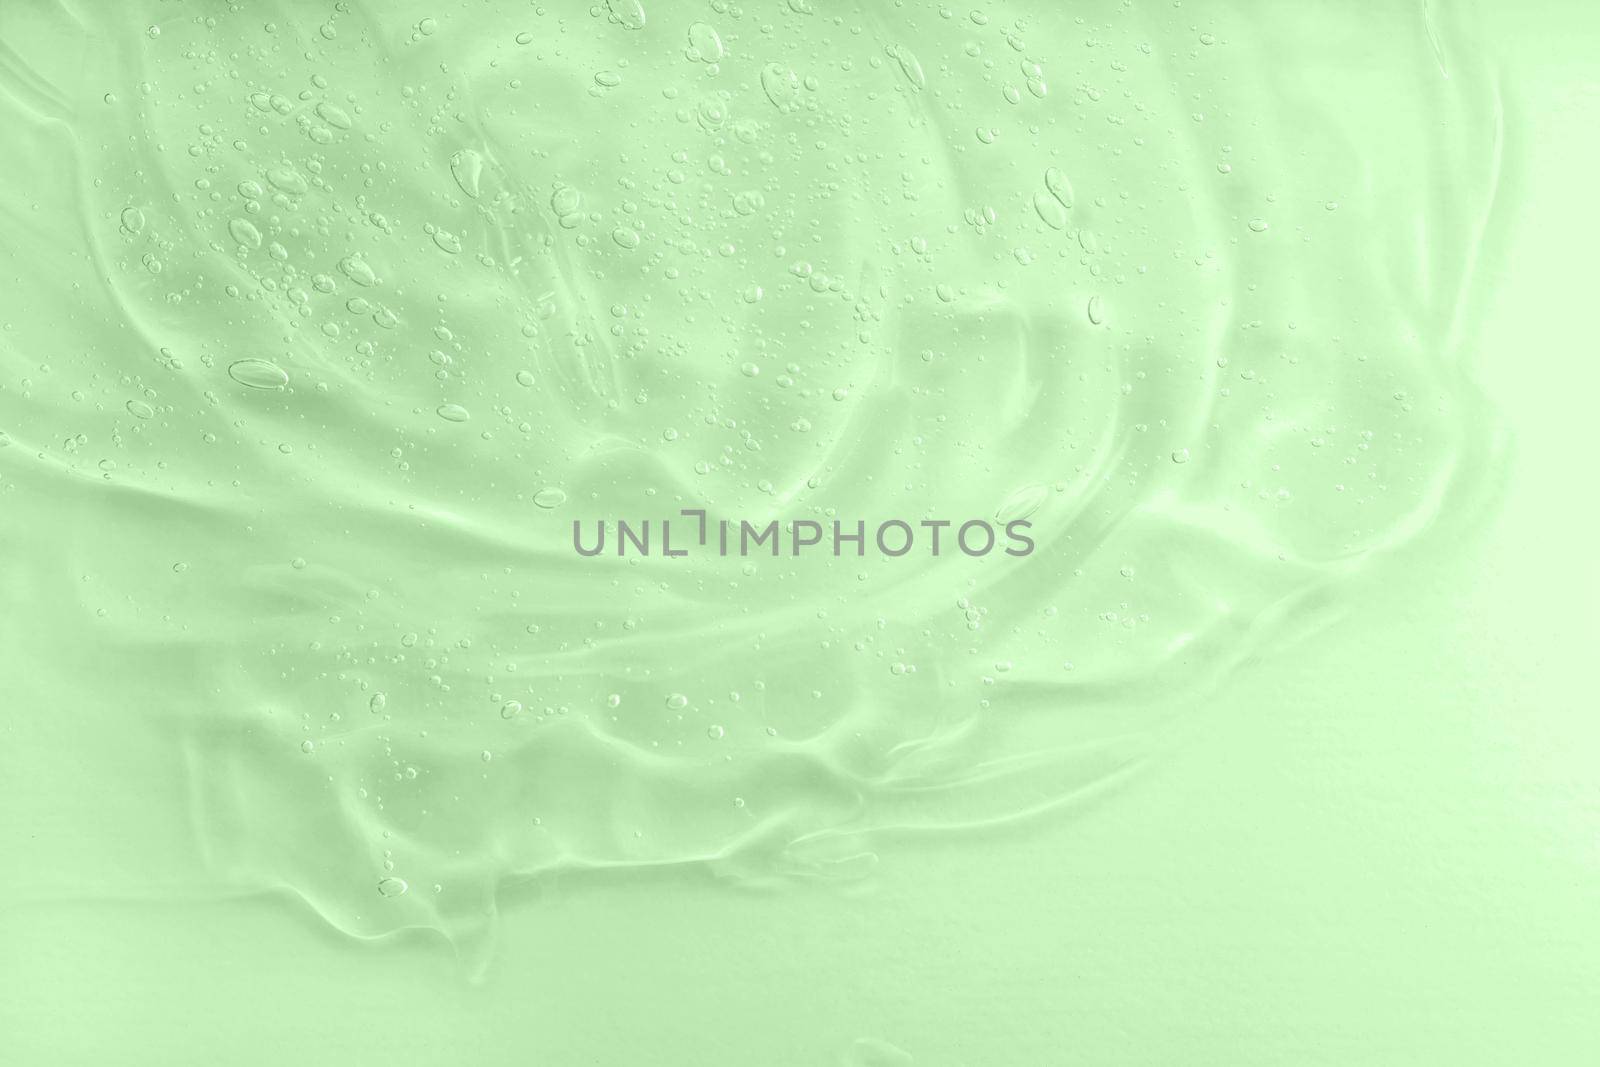 Aloe vera cosmetic gel texture with bubbles background. Skincare moisturizing product. Liquid green oil smudge. The concept of natural cosmetics. Hyaluronic acid clear serum sample. Close-up, macro.